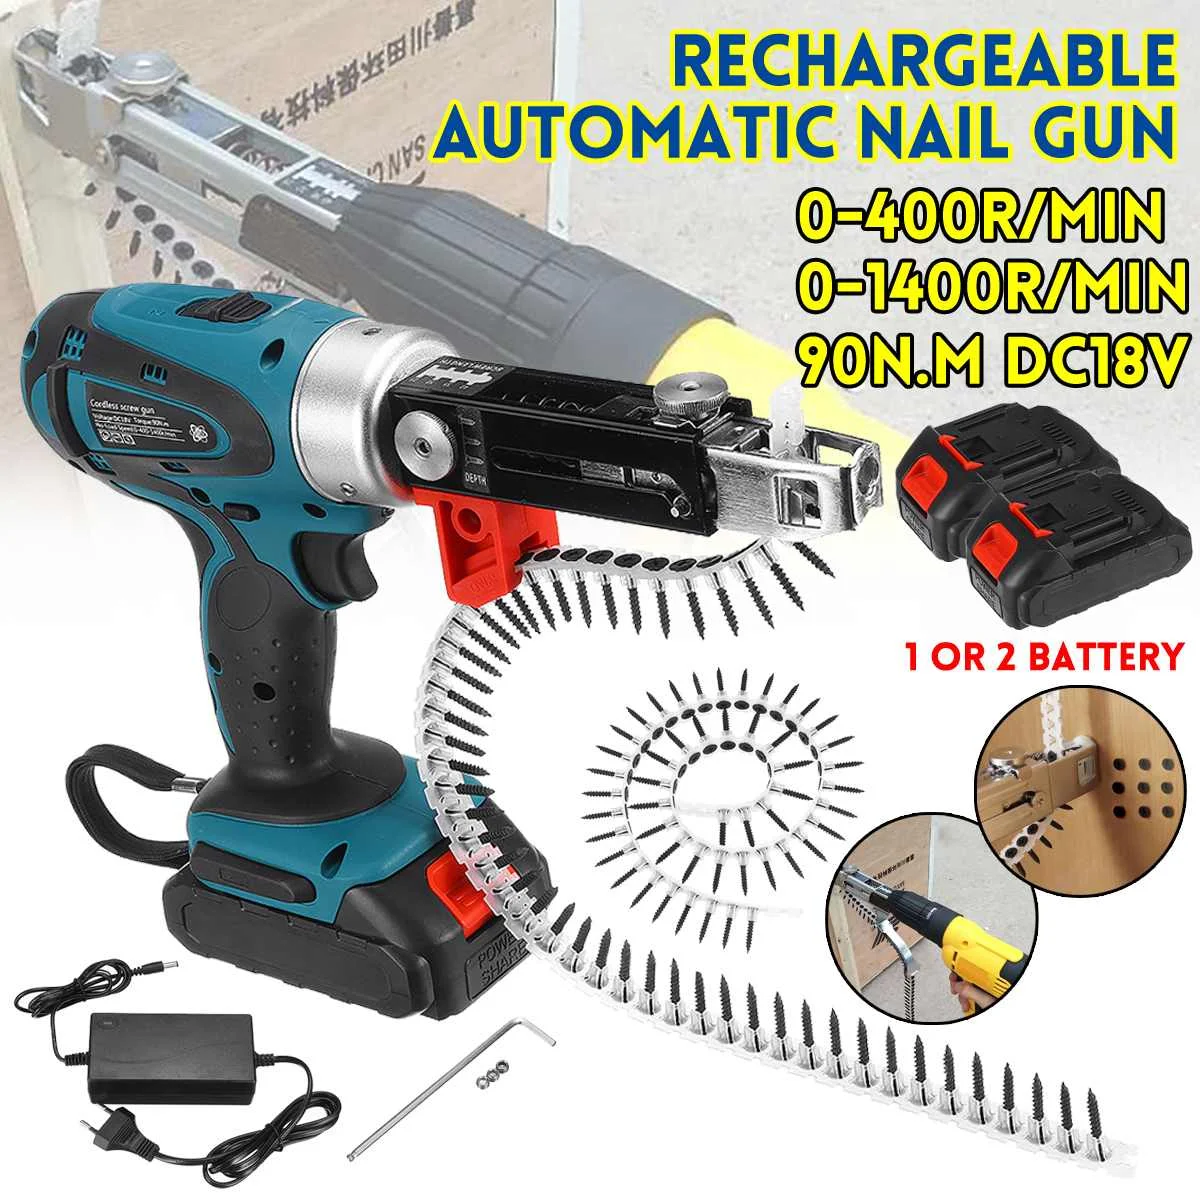 

90N.m Brushless Electric Nail Gun Nailer Stapler Woodworking Electric Tacker Furniture Power Tools with 1 or 2 Battery